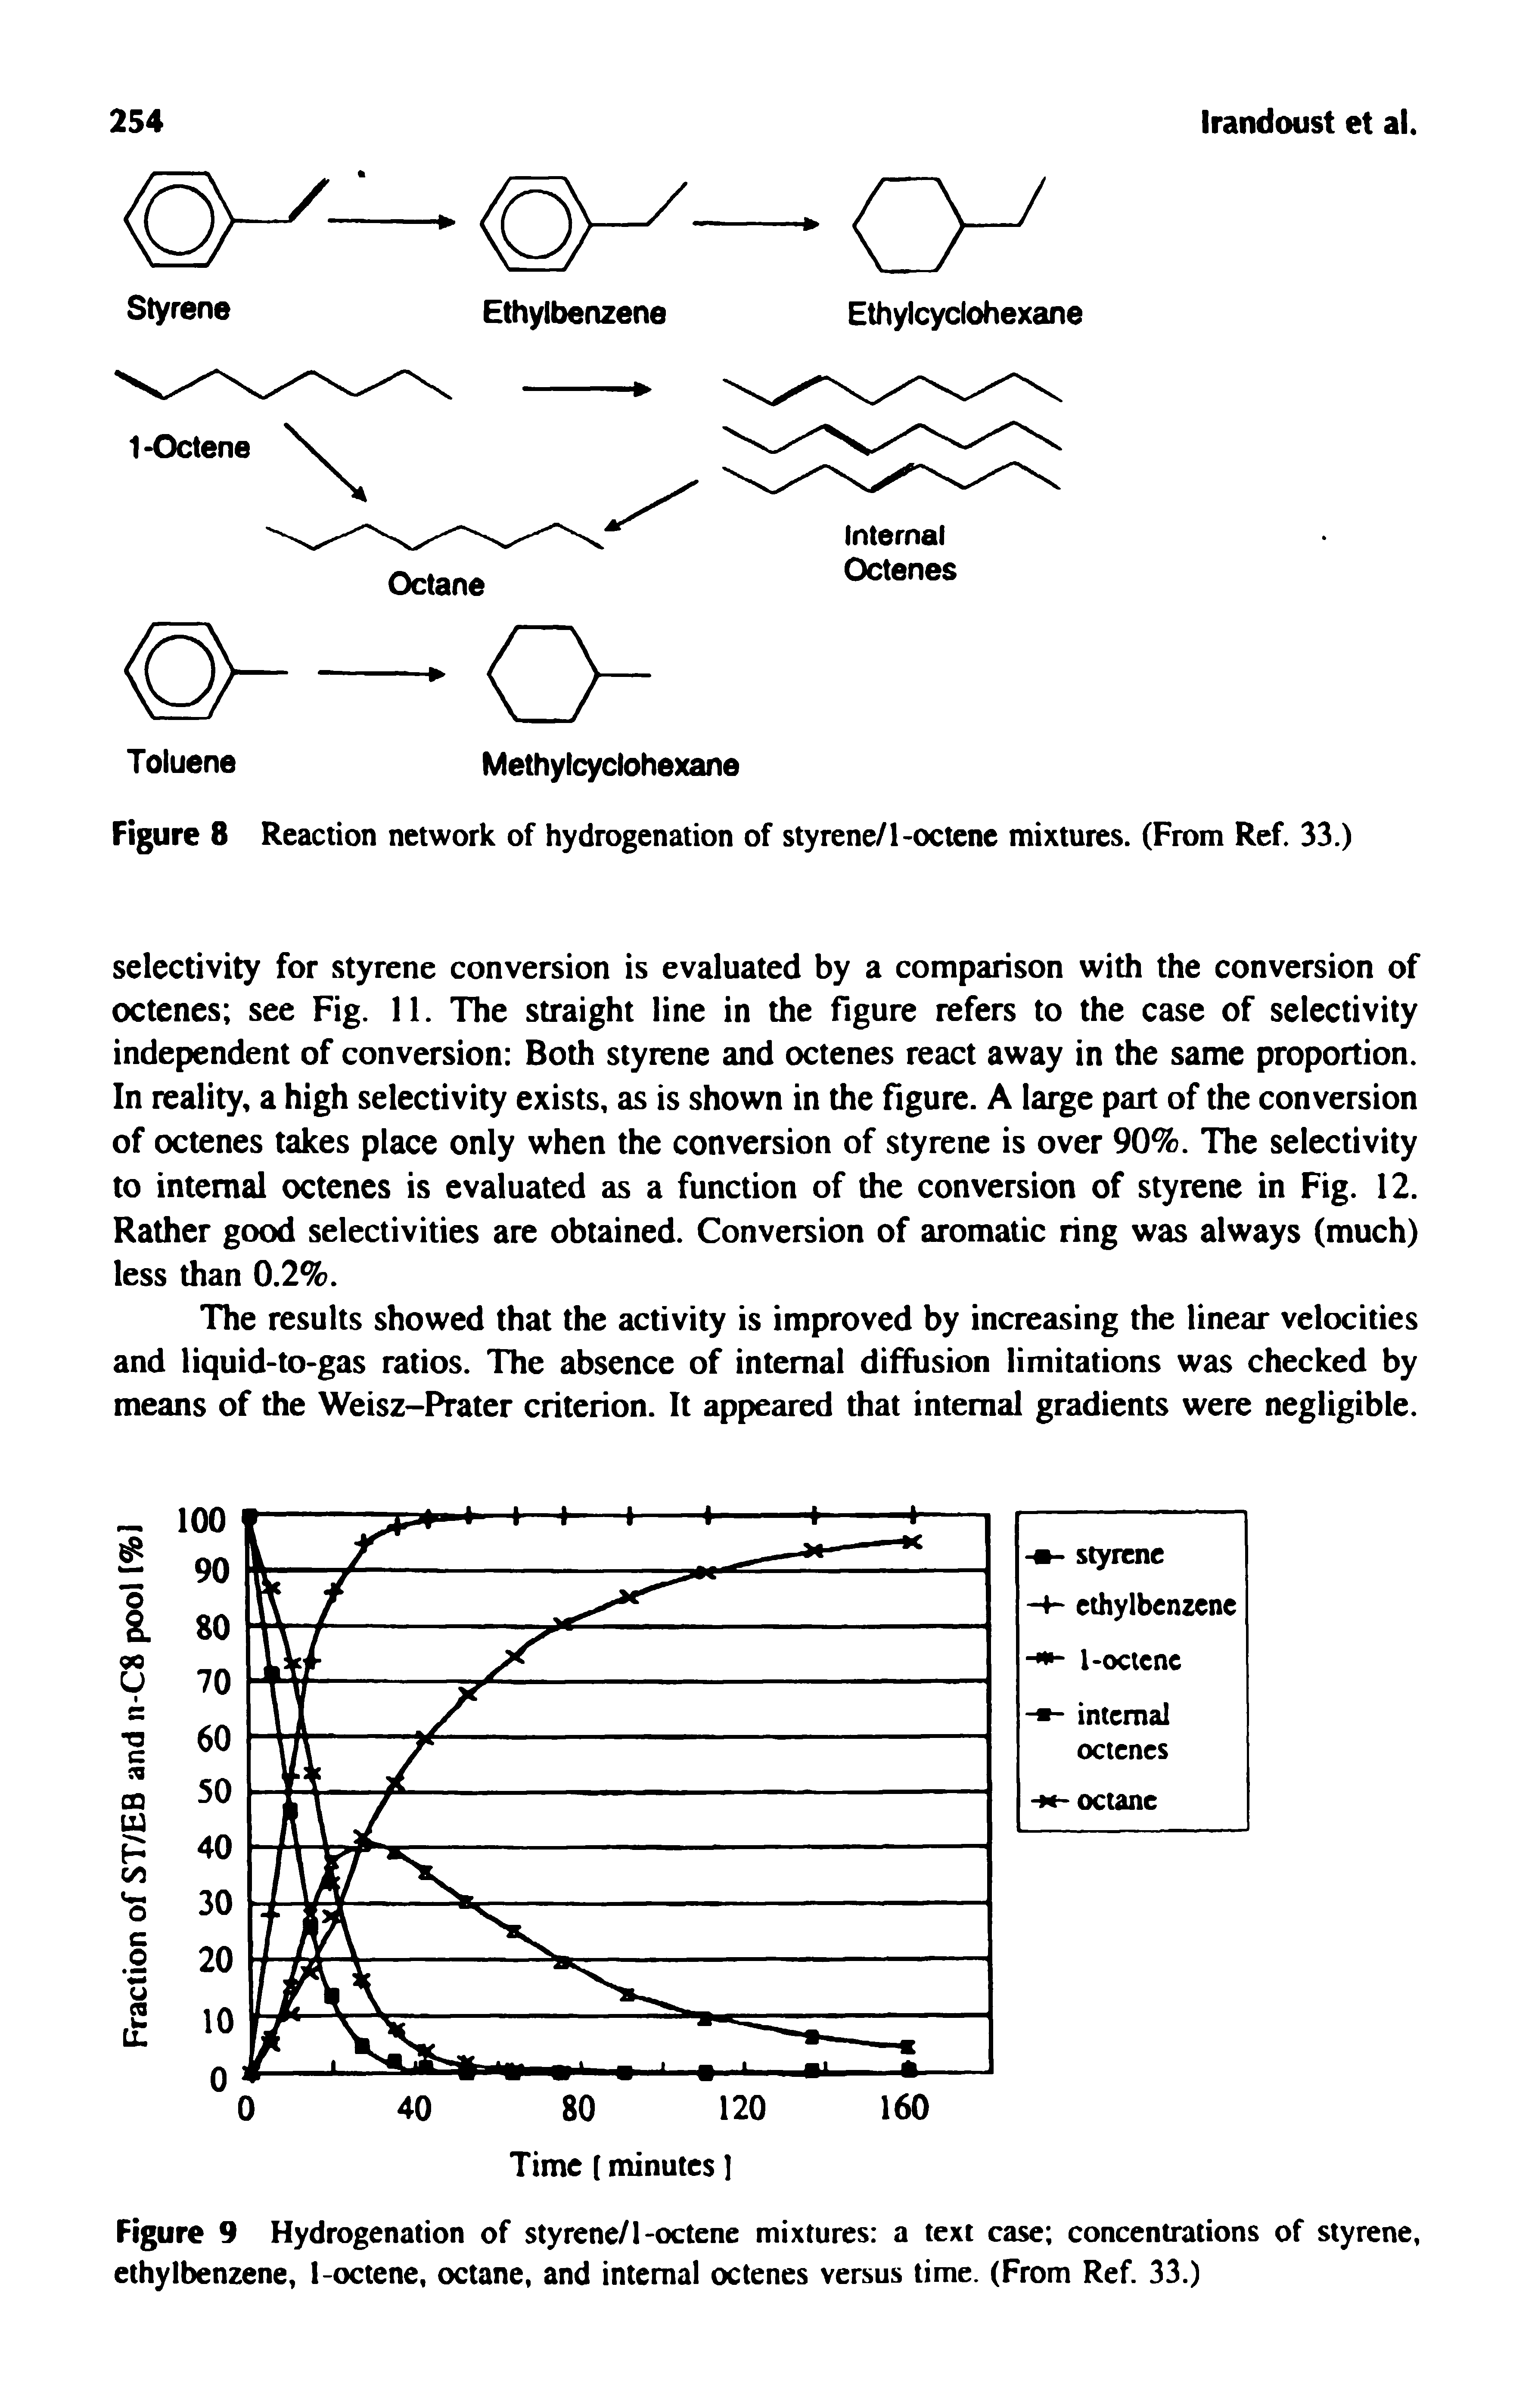 Figure 9 Hydrogenation of styrene/1-octene mixtures a text case concentrations of styrene, ethylbenzene, I-octene, octane, and internal octenes versus time. (From Ref. 33.)...